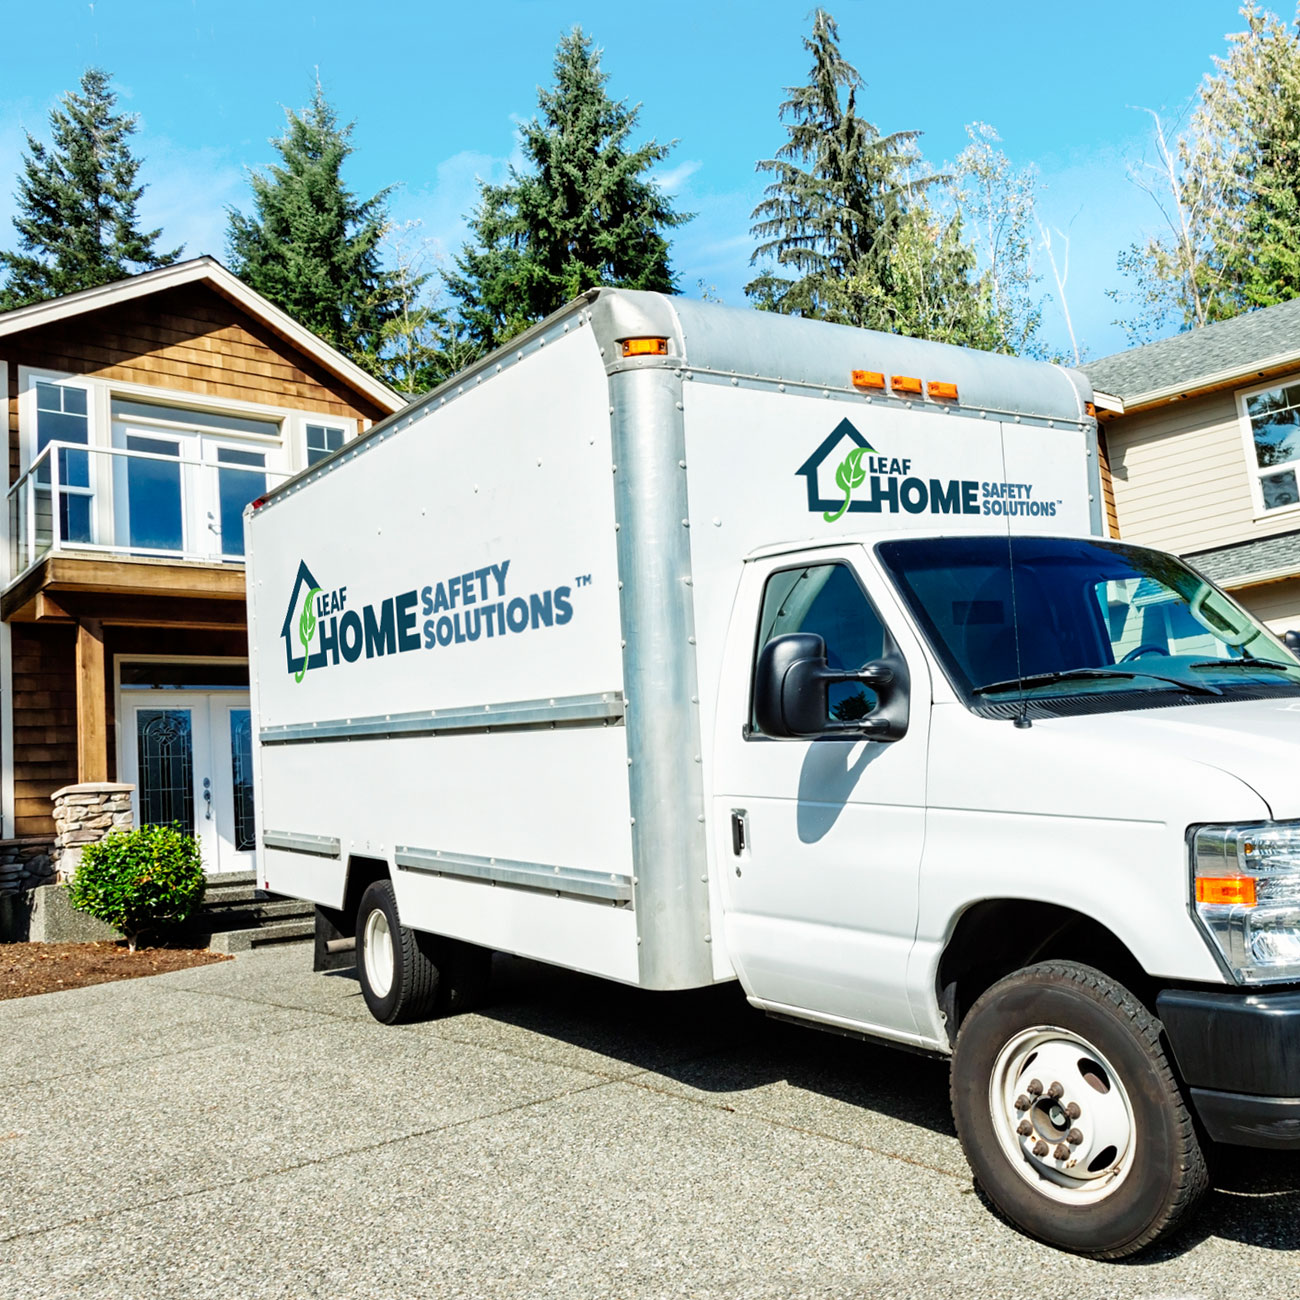 Leaf Home Safety Solutions delivery truck as it makes a delivery to resdential home